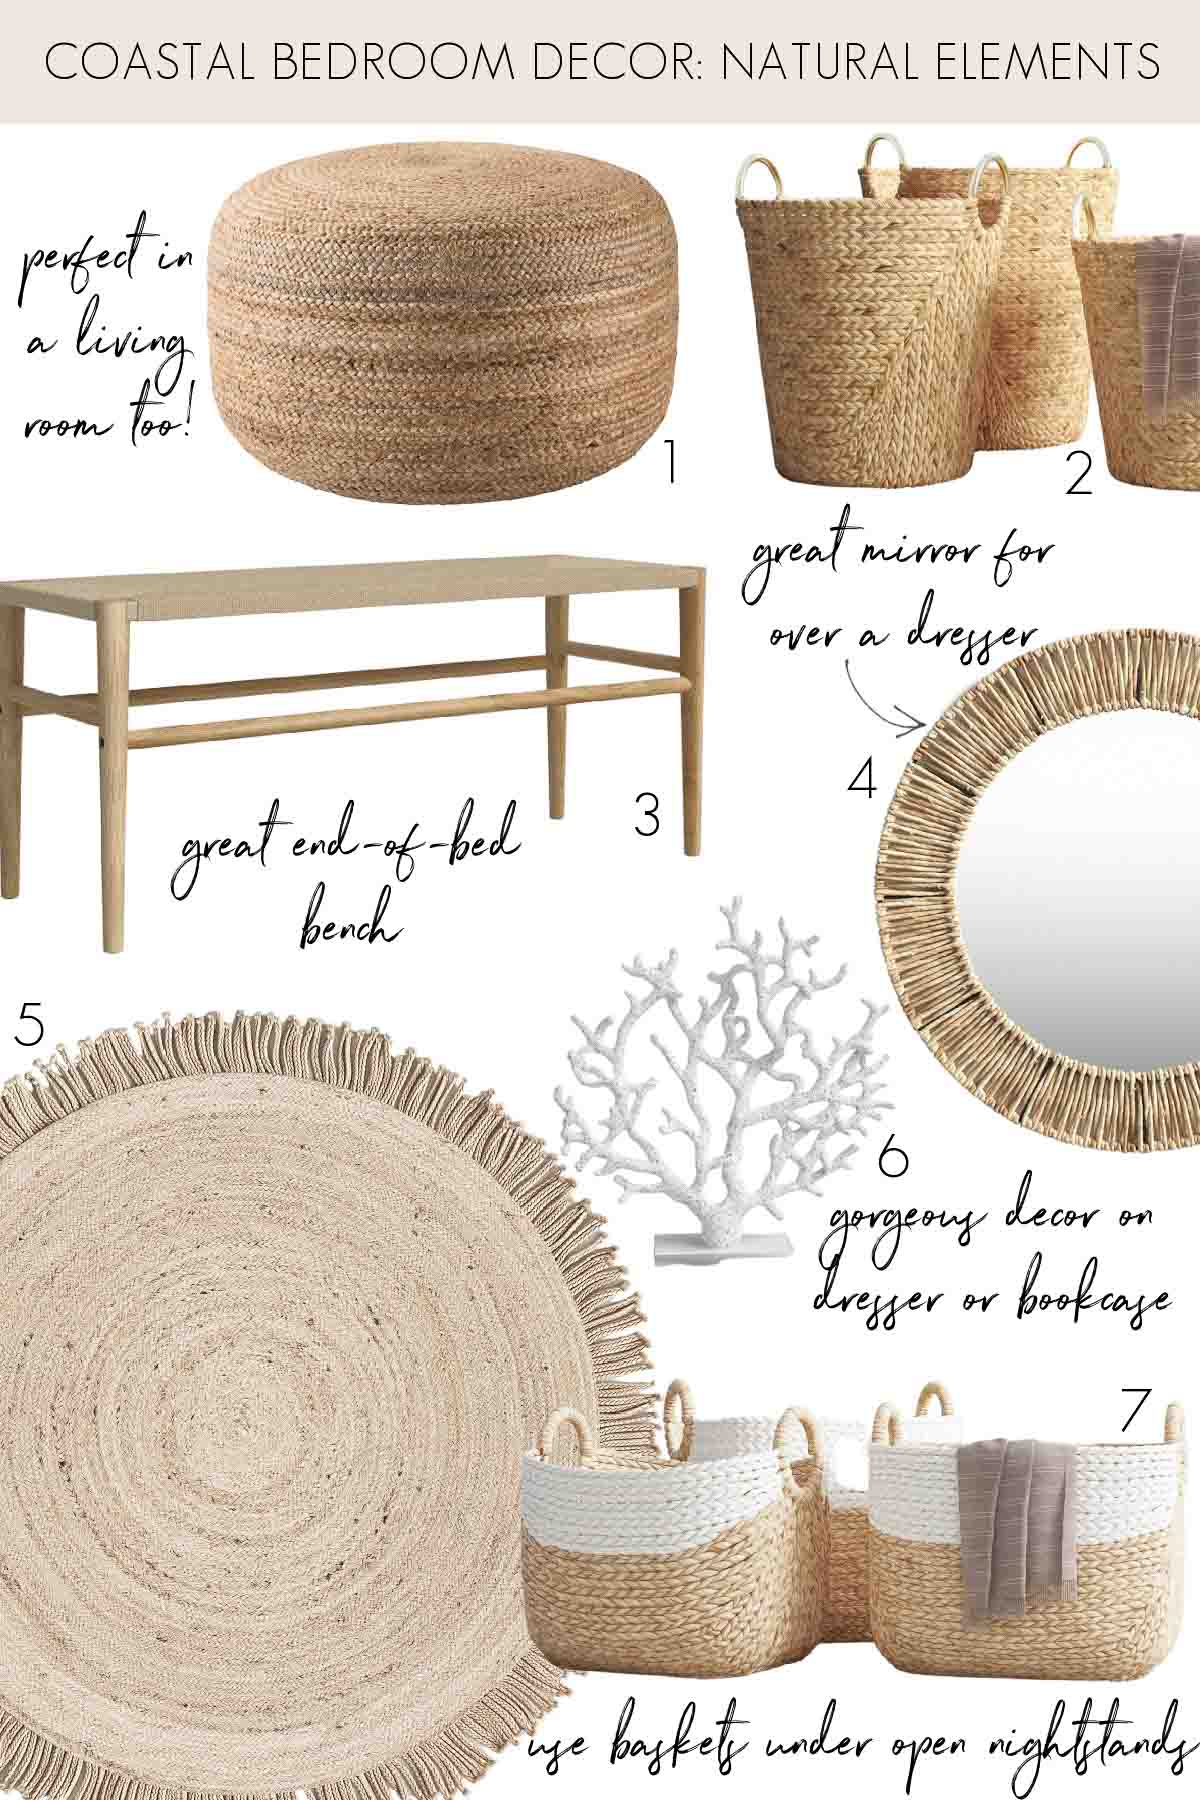 Jute pouf, baskets, bench, mirror, and rug plus coral as natural elements in coastal bedroom decor